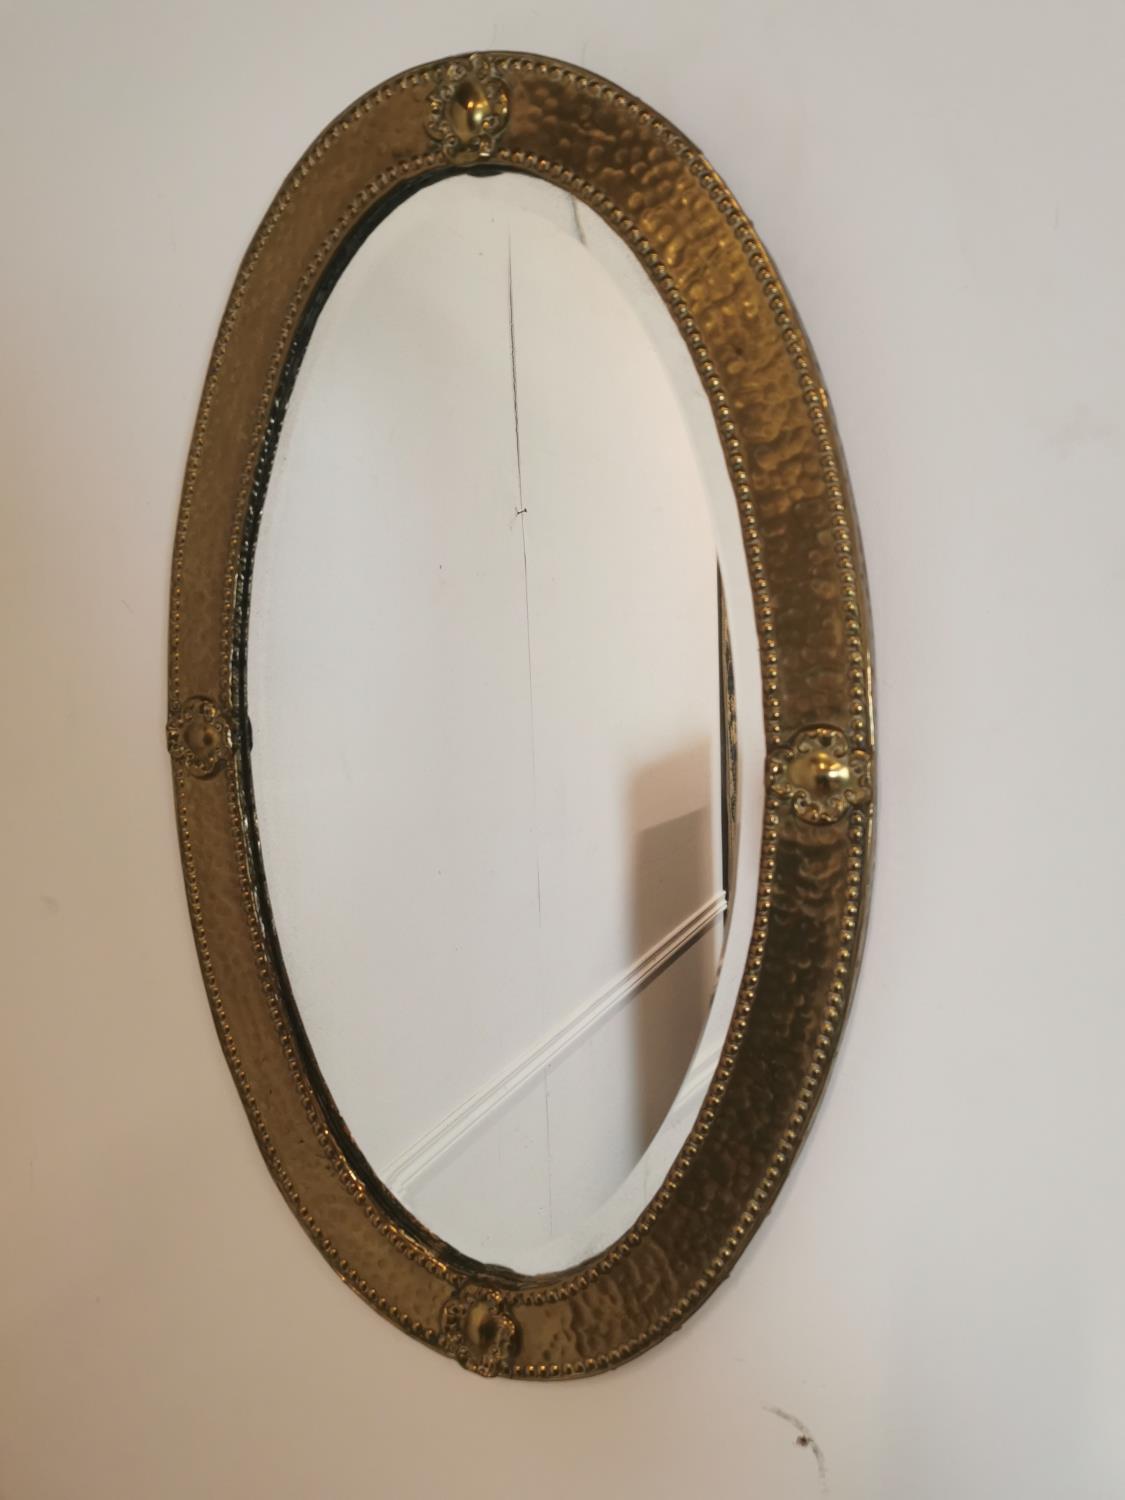 Early 20th C. oval wall mirror